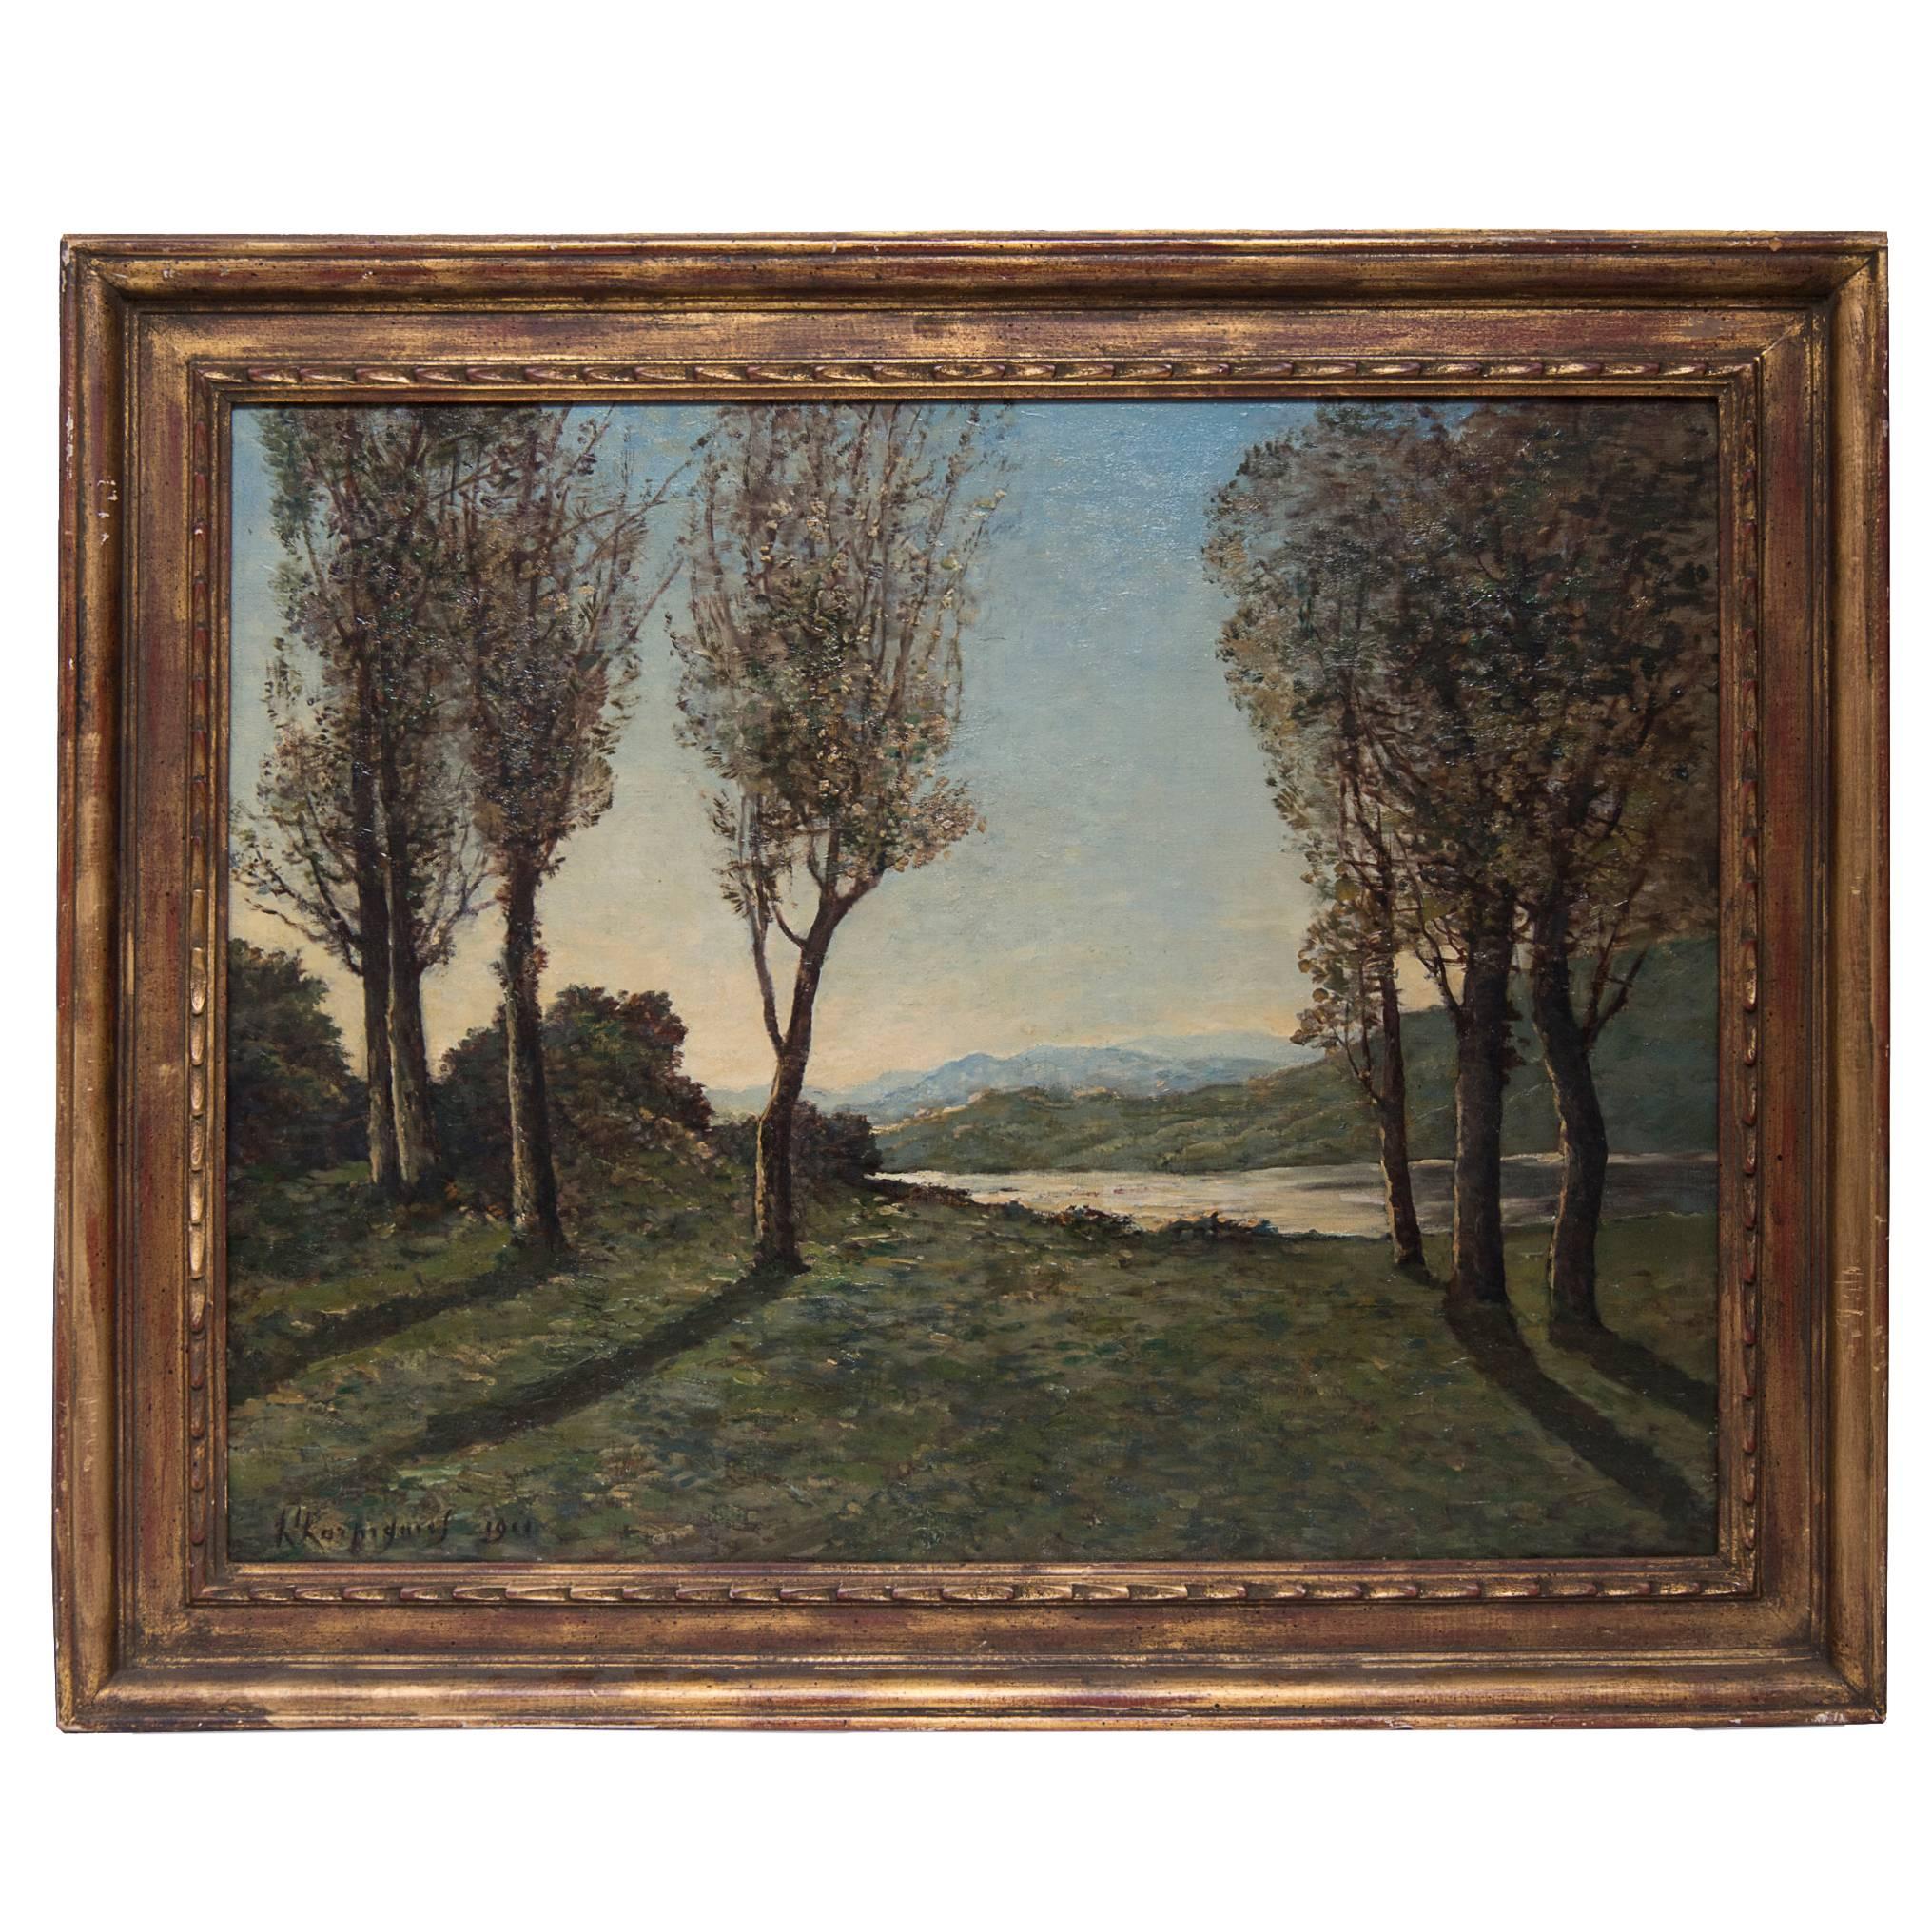 Oil on Canvas by Henry Harpignies Signed on the Lower Left and Dated 1903